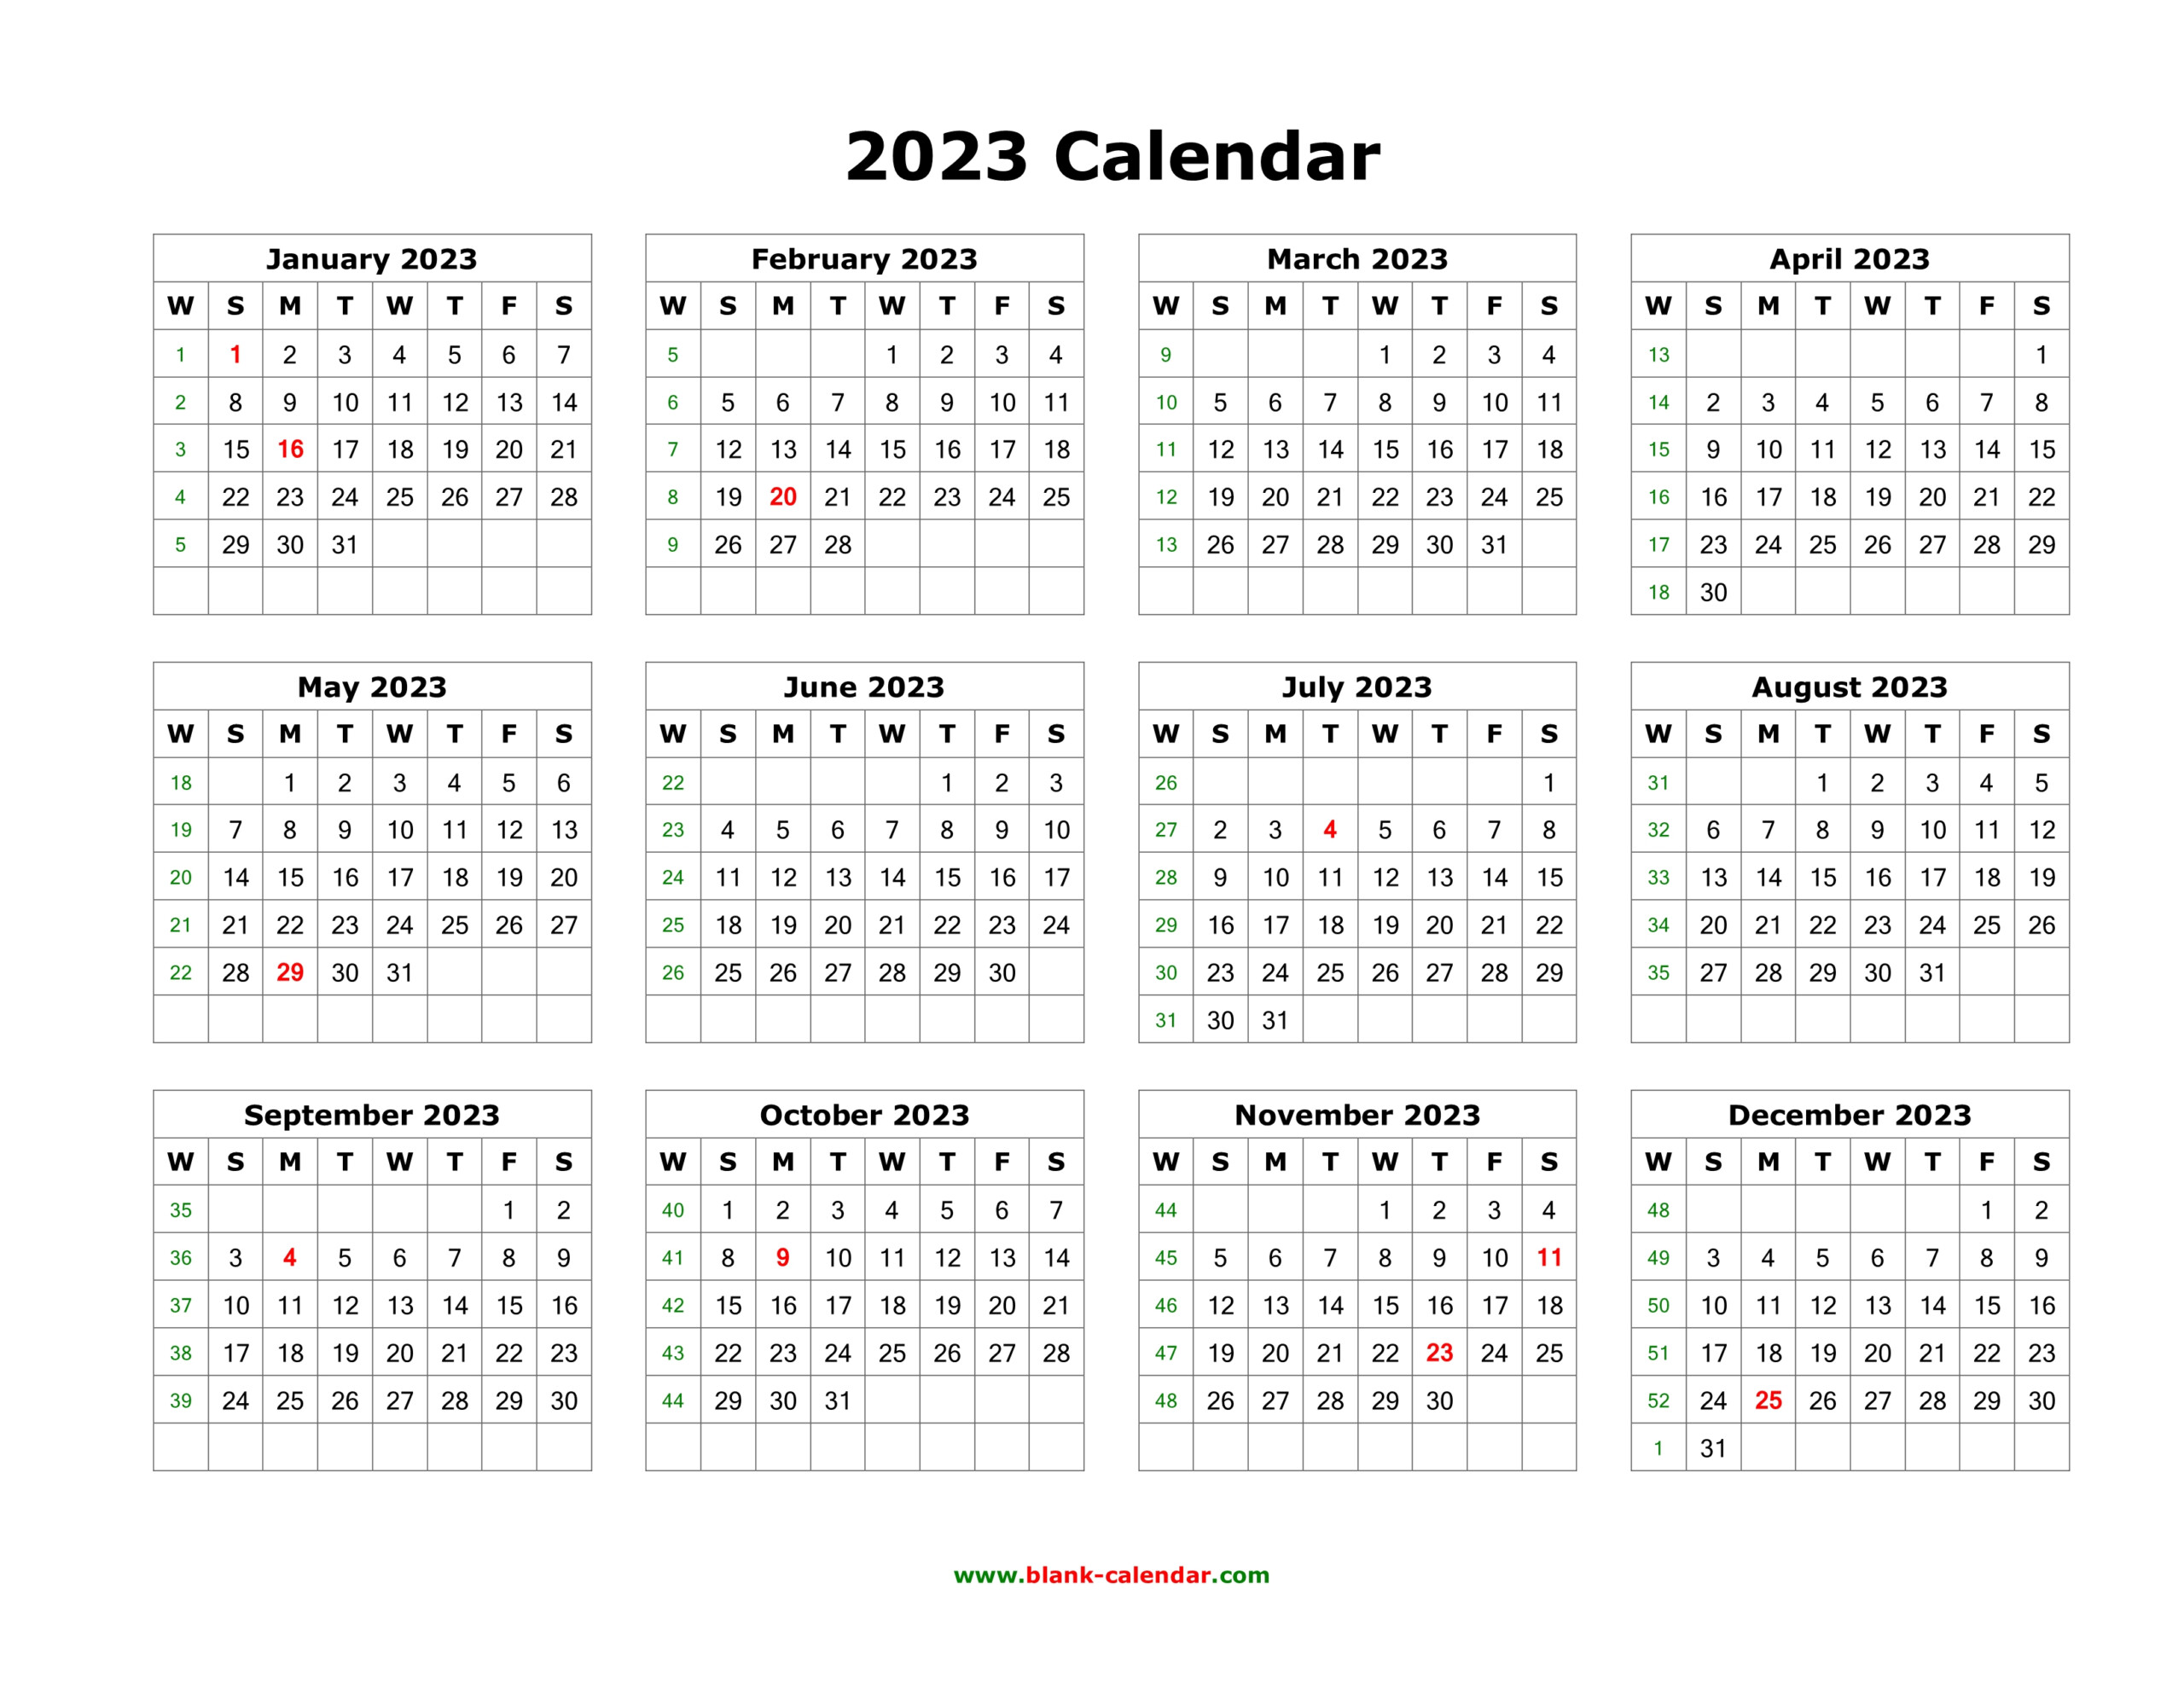 free-printable-yearly-calendar-2023-shopmall-my-yearlycalendars